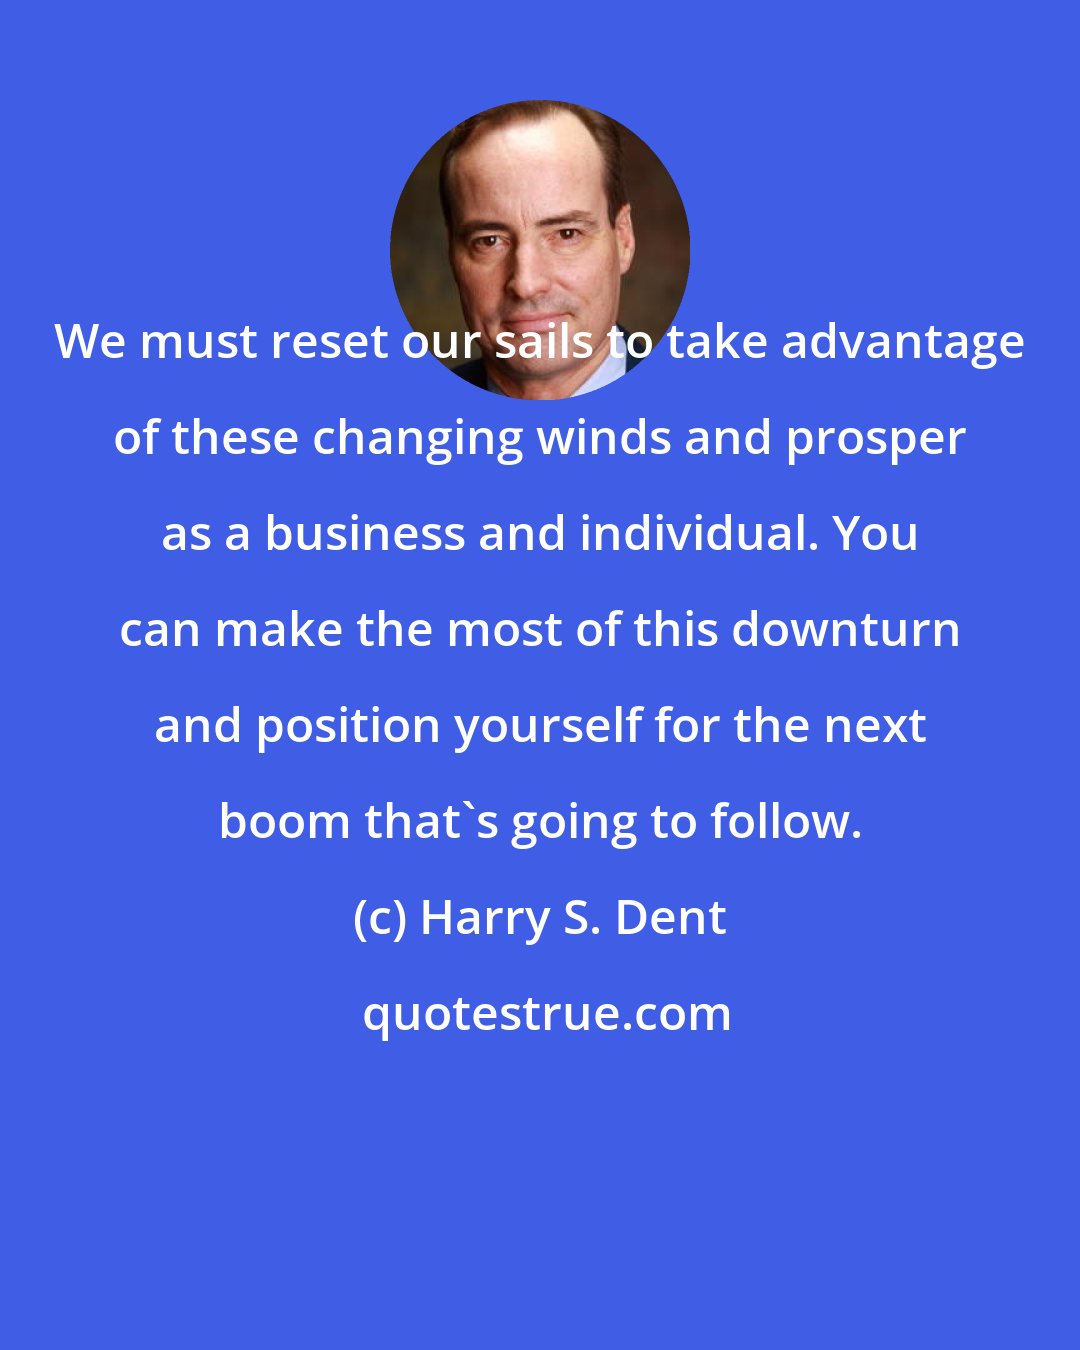 Harry S. Dent: We must reset our sails to take advantage of these changing winds and prosper as a business and individual. You can make the most of this downturn and position yourself for the next boom that's going to follow.